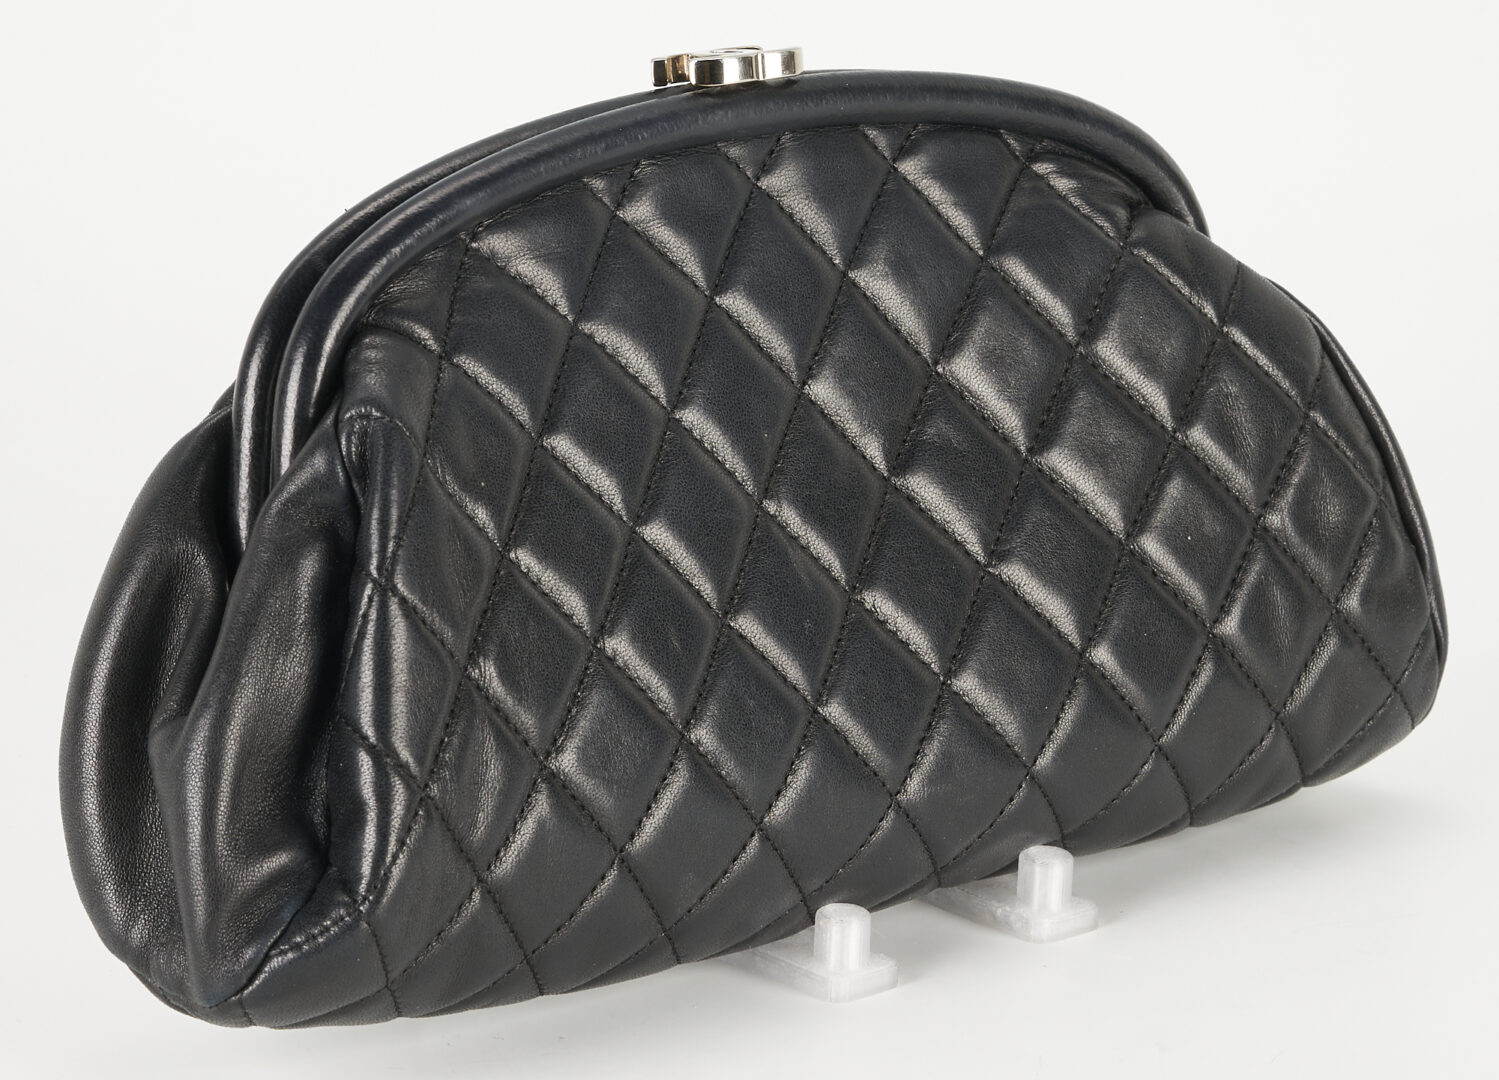 Lot 99: Chanel Quilted Lambskin Timeless Clutch